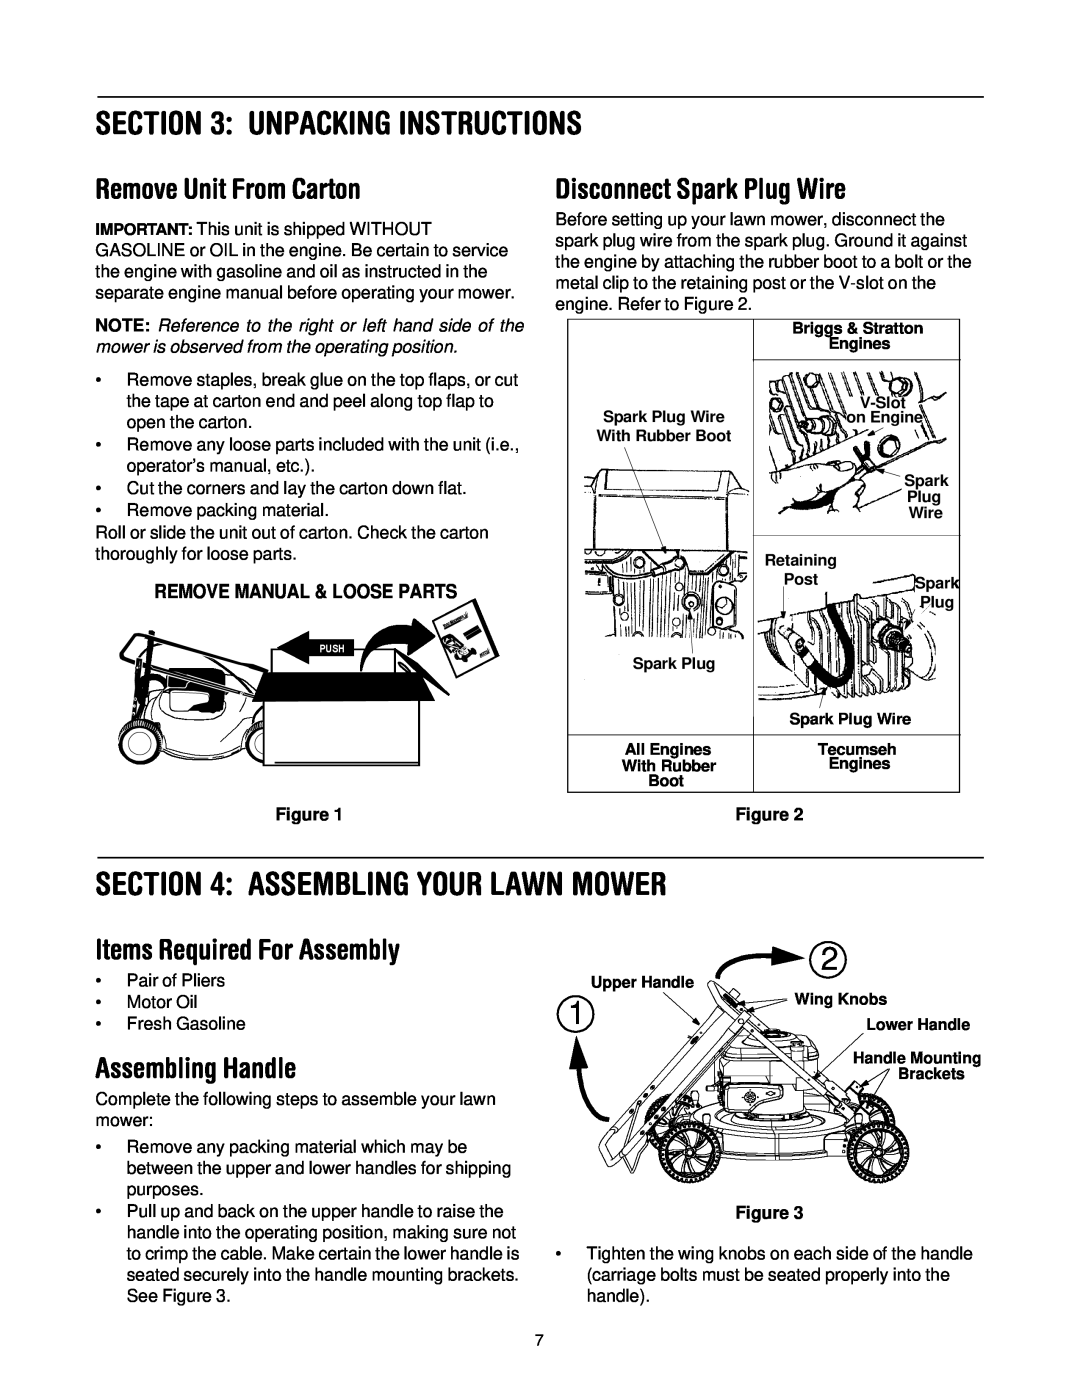 MTD Series 070 Unpacking Instructions, Assembling Your Lawn Mower, Remove Unit From Carton, Disconnect Spark Plug Wire 